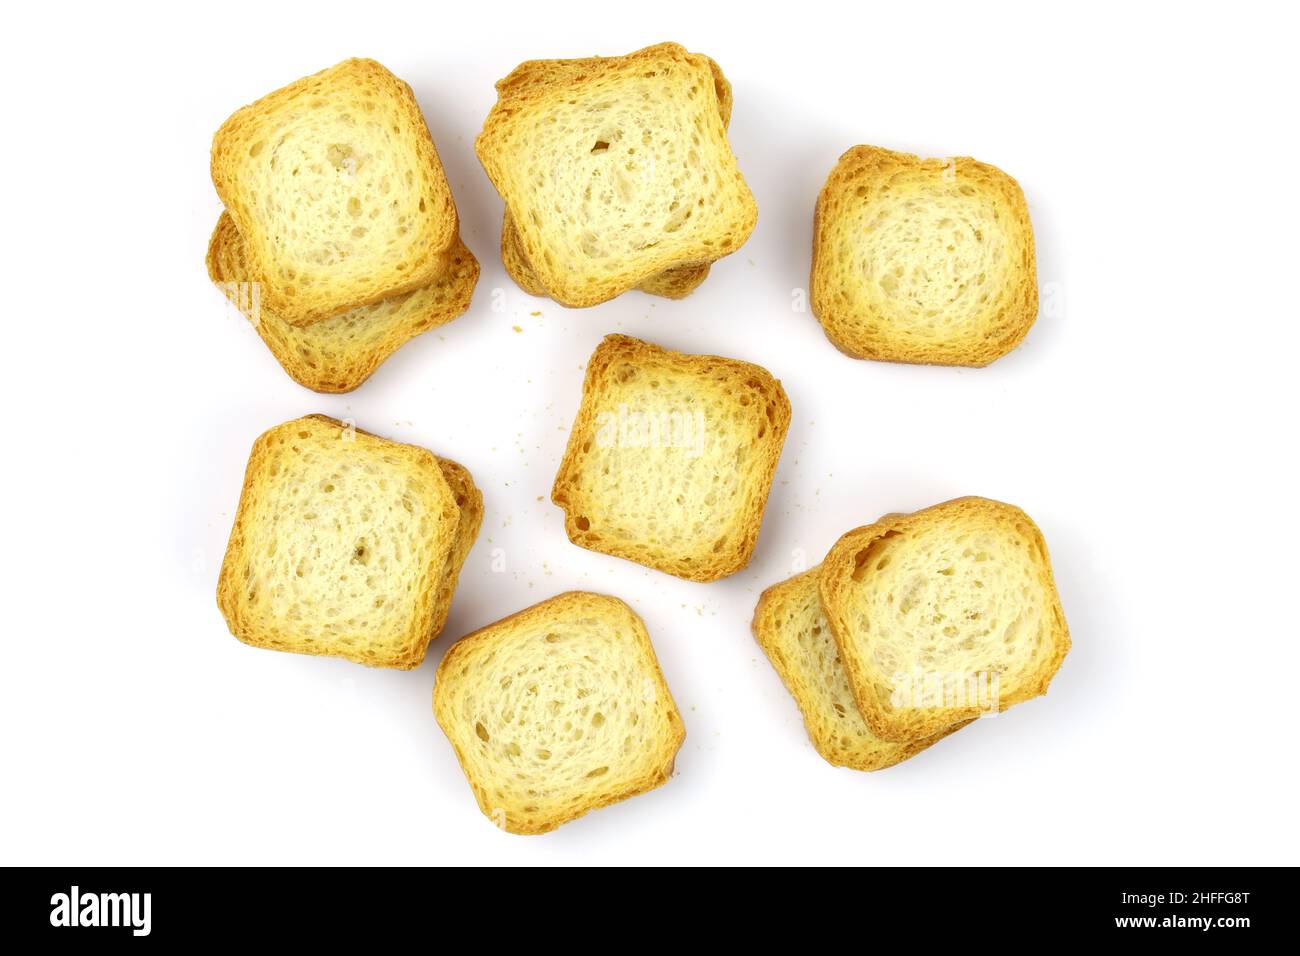 Square white bread croutons top view. Croutons on a white background. Wheat mini croutons for snacks. Stock Photo